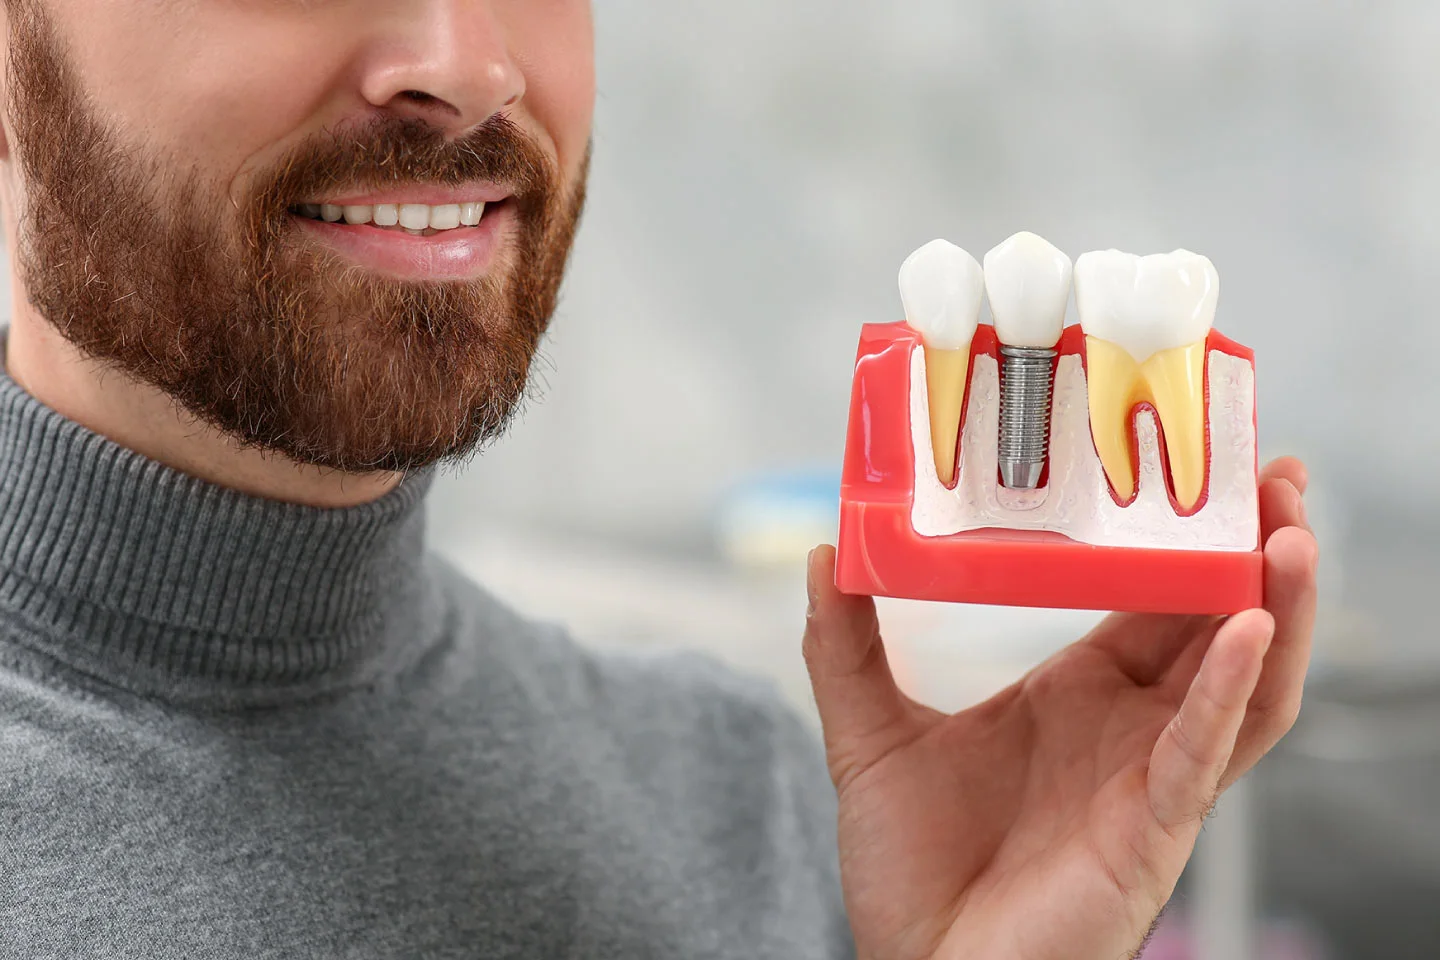 An Implant Dentist Discusses 5 Cosmetic Benefits of Replacing Missing Teeth